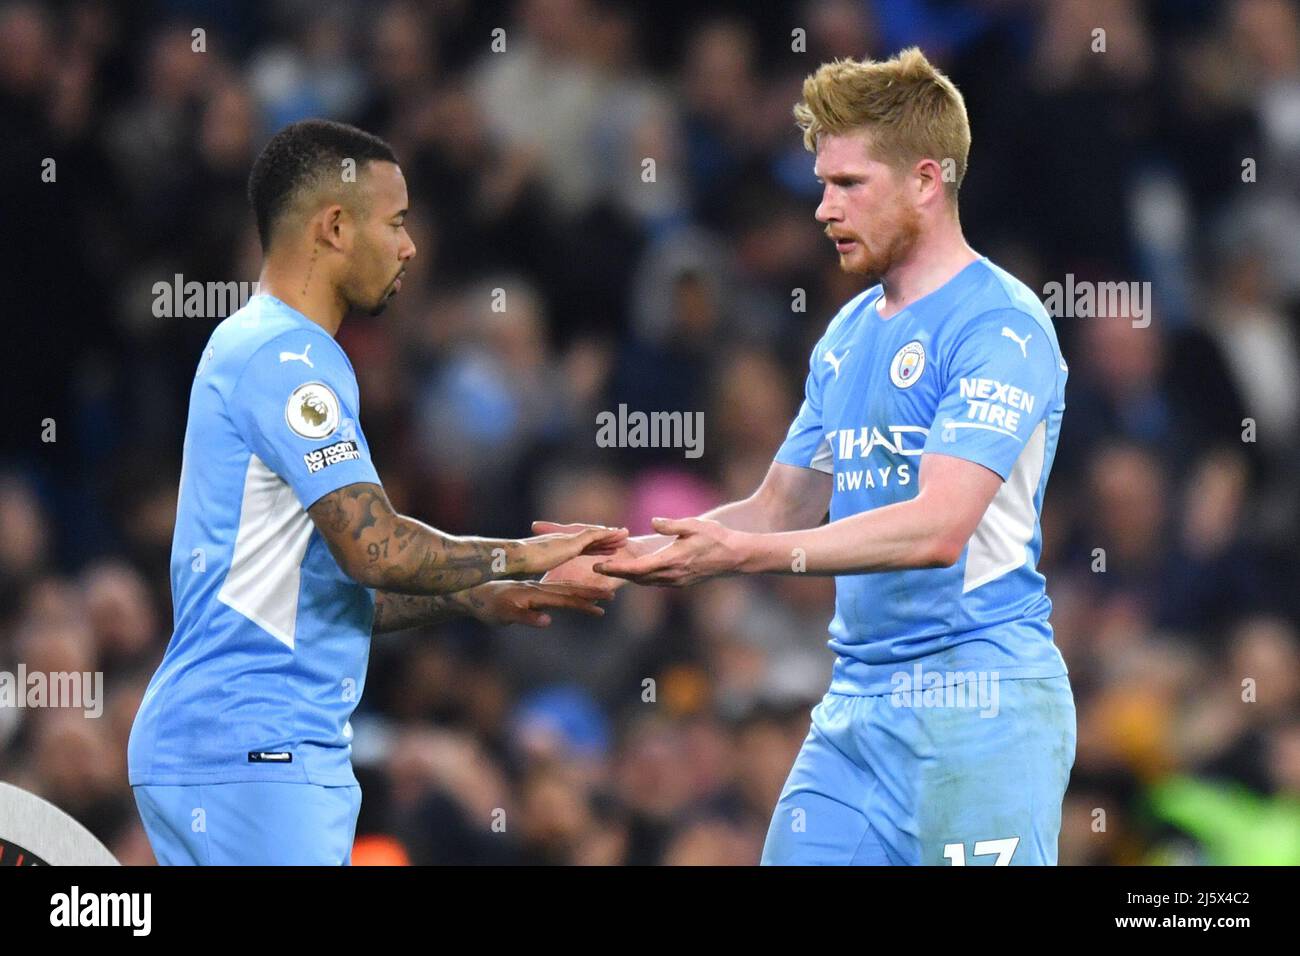 Manchester City's Kevin De Bruyne is substituted for Manchester City's Gabriel Jesus. Picture date: Thursday April 21, 2022. Photo credit should read:   Anthony Devlin/Alamy Live News/Alamy Live News Stock Photo